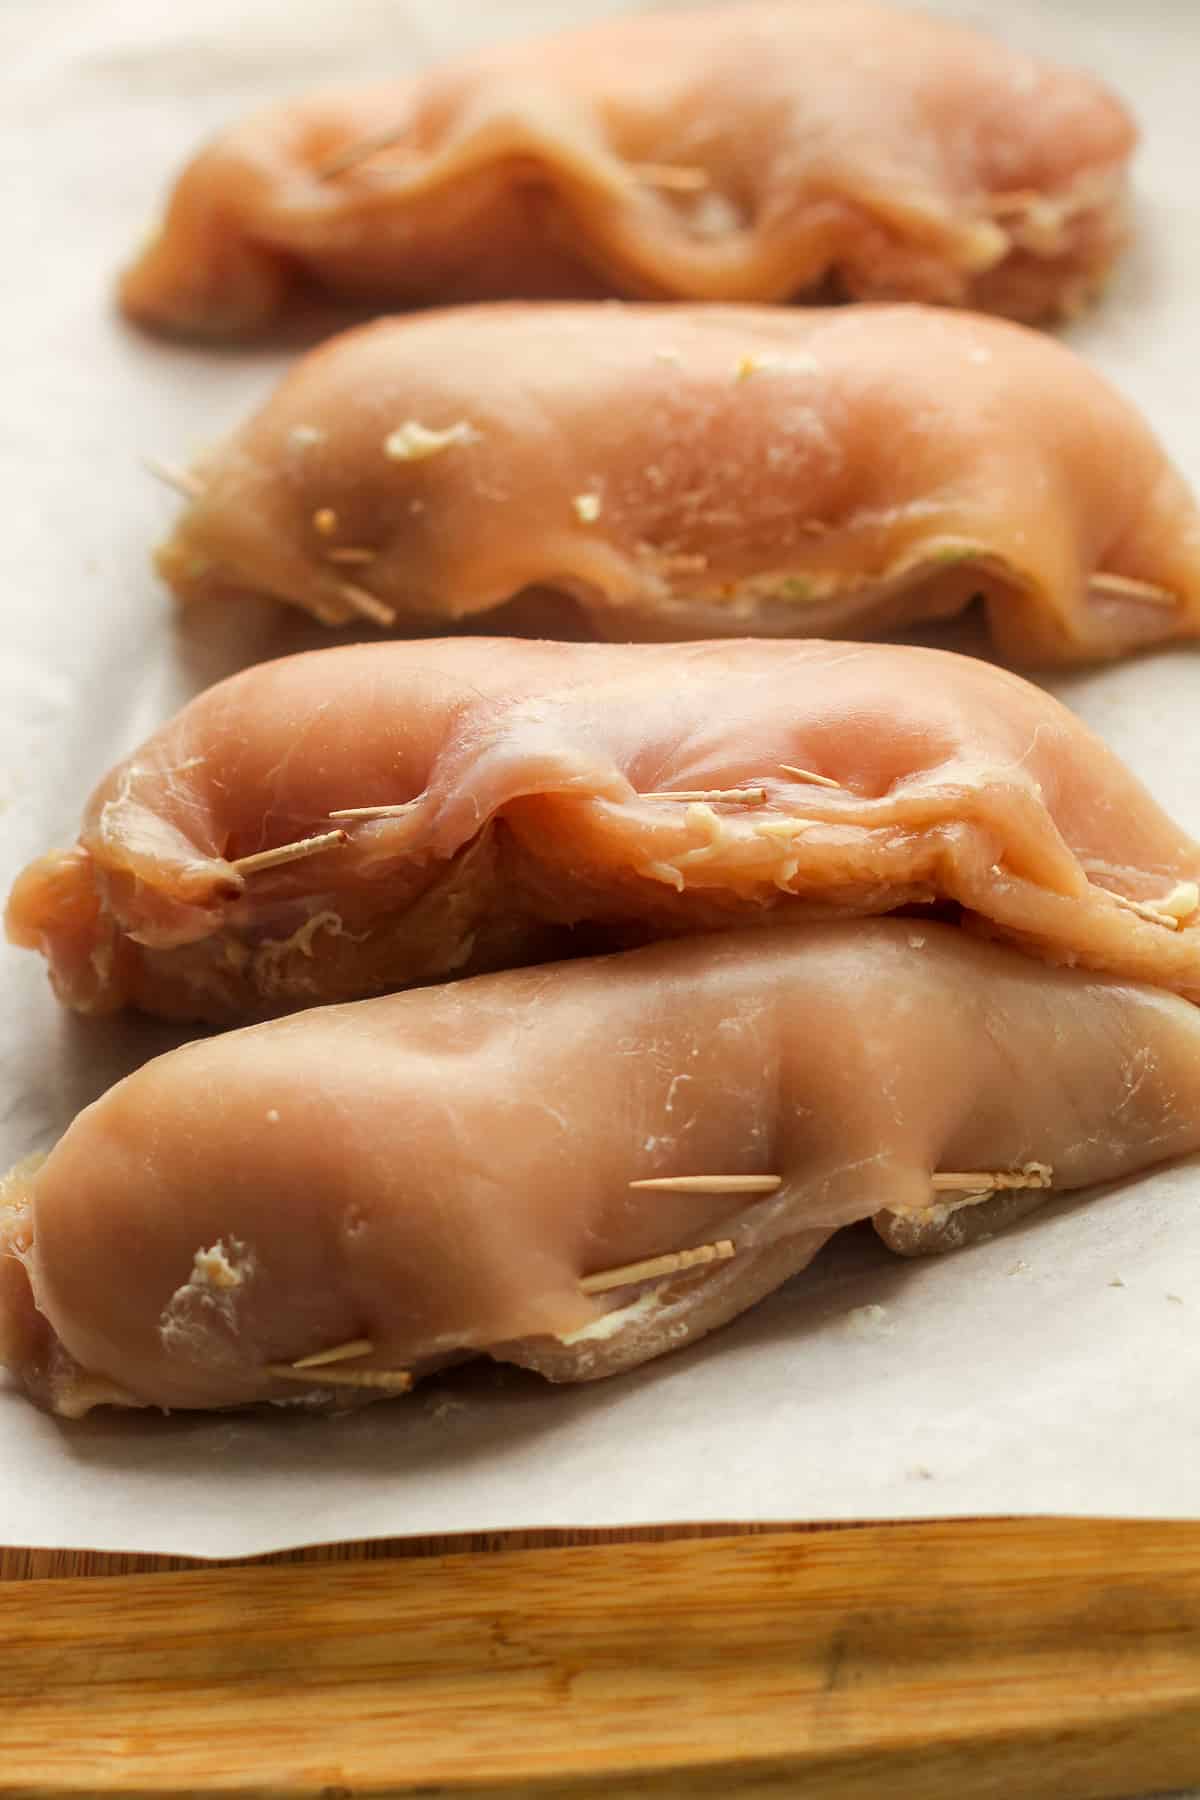 Side view of stuffed breasts, secured with toothpicks.